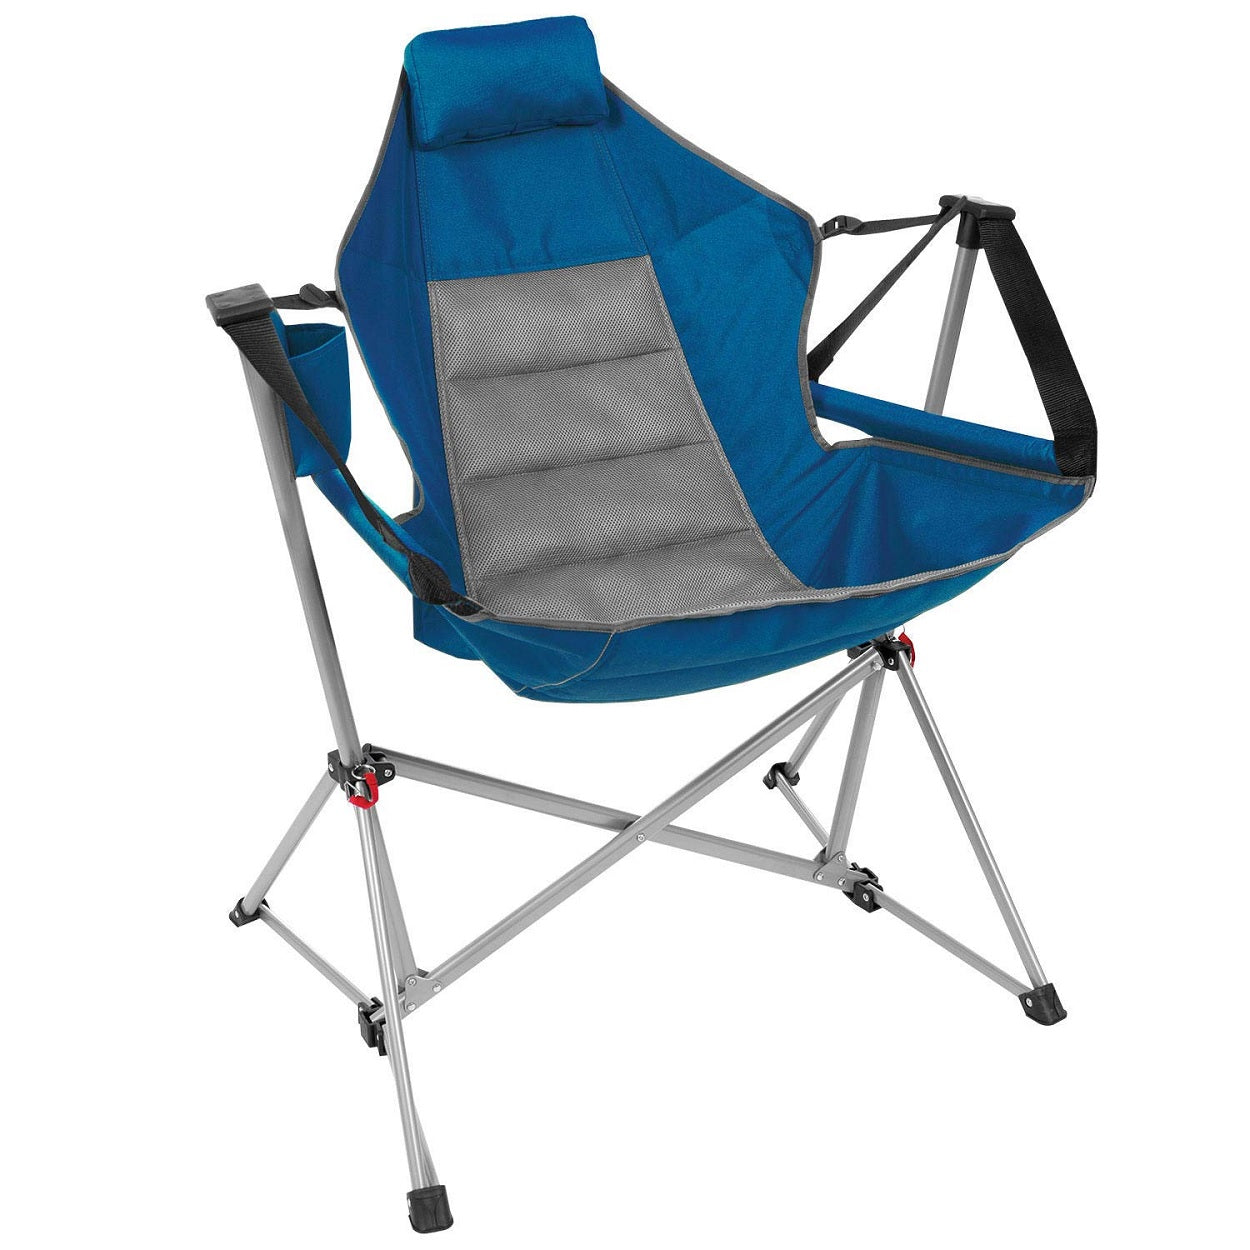 Swing Chair Lounger Wide Seat with Adjustable Backrest, Blue